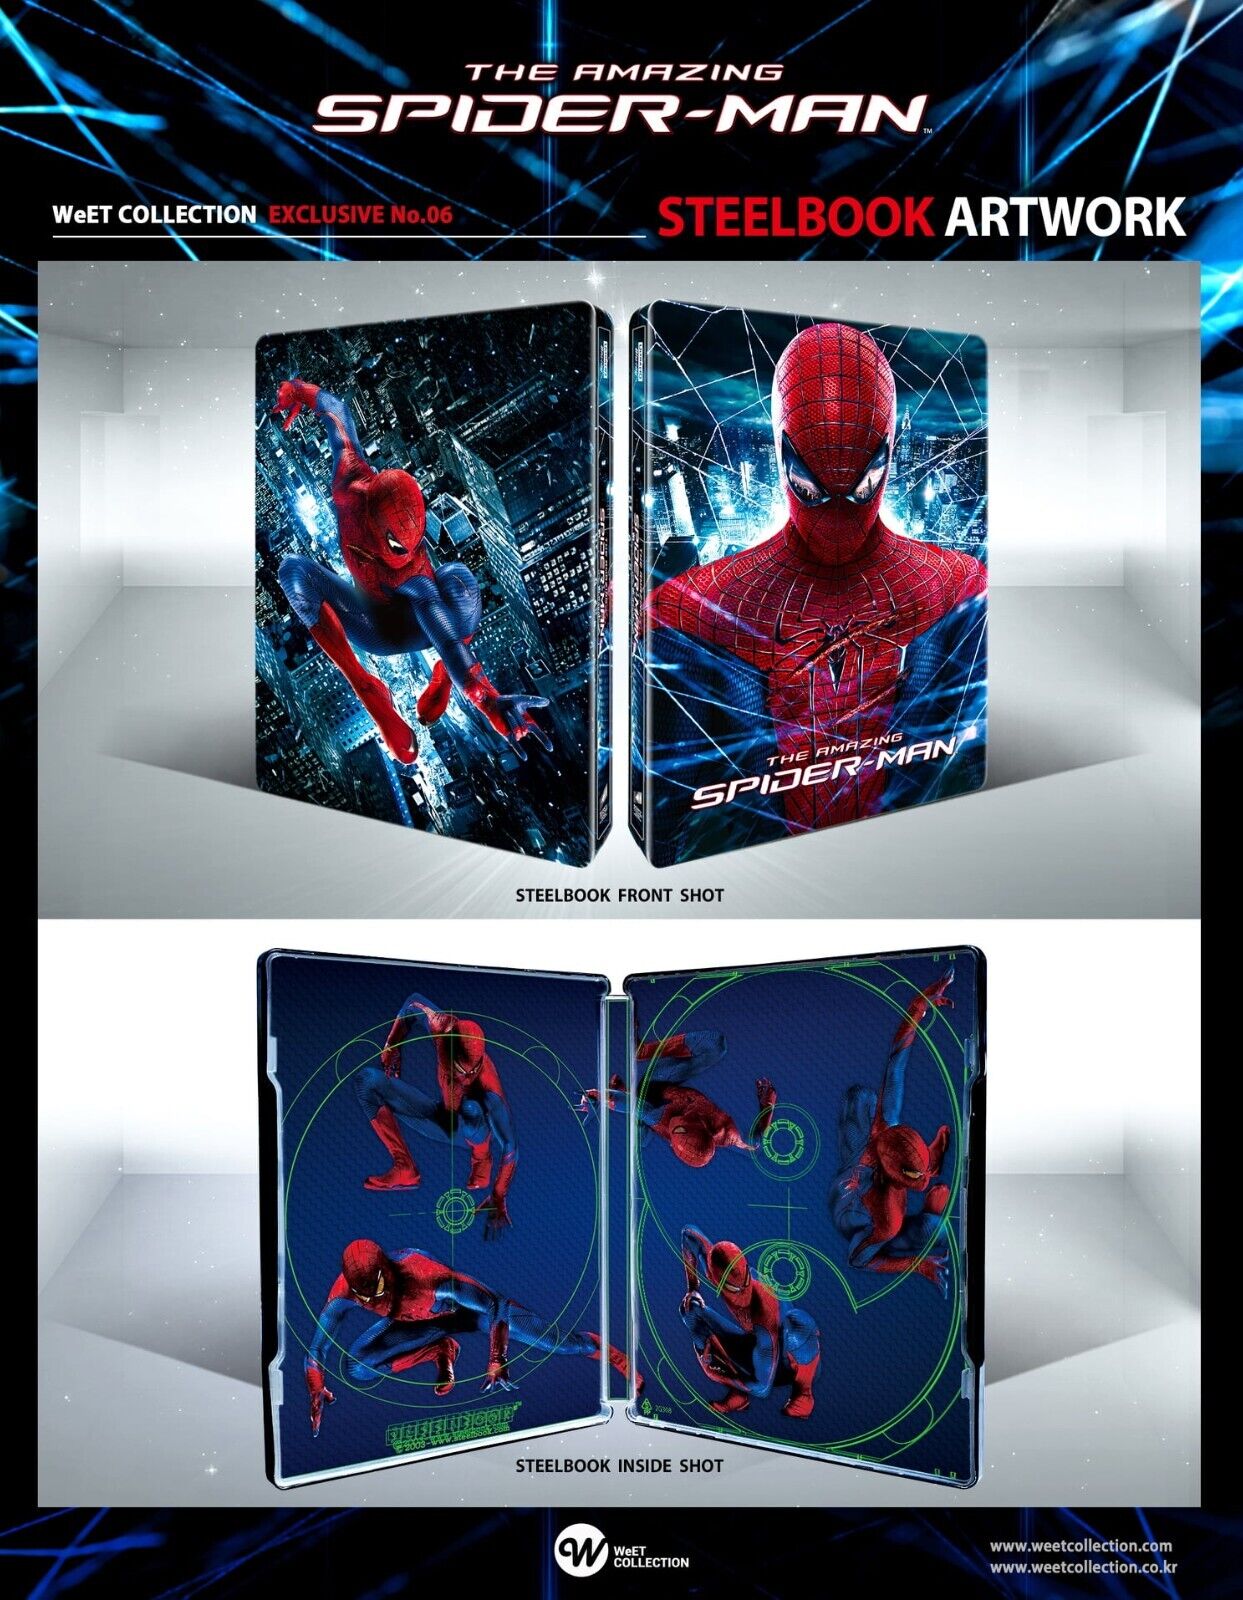 The Amazing Spider-Man 1+2 4K+2D Blu-ray Steelbook LE WeET Collcection Exclusive #6 & #7 One Click Box Set